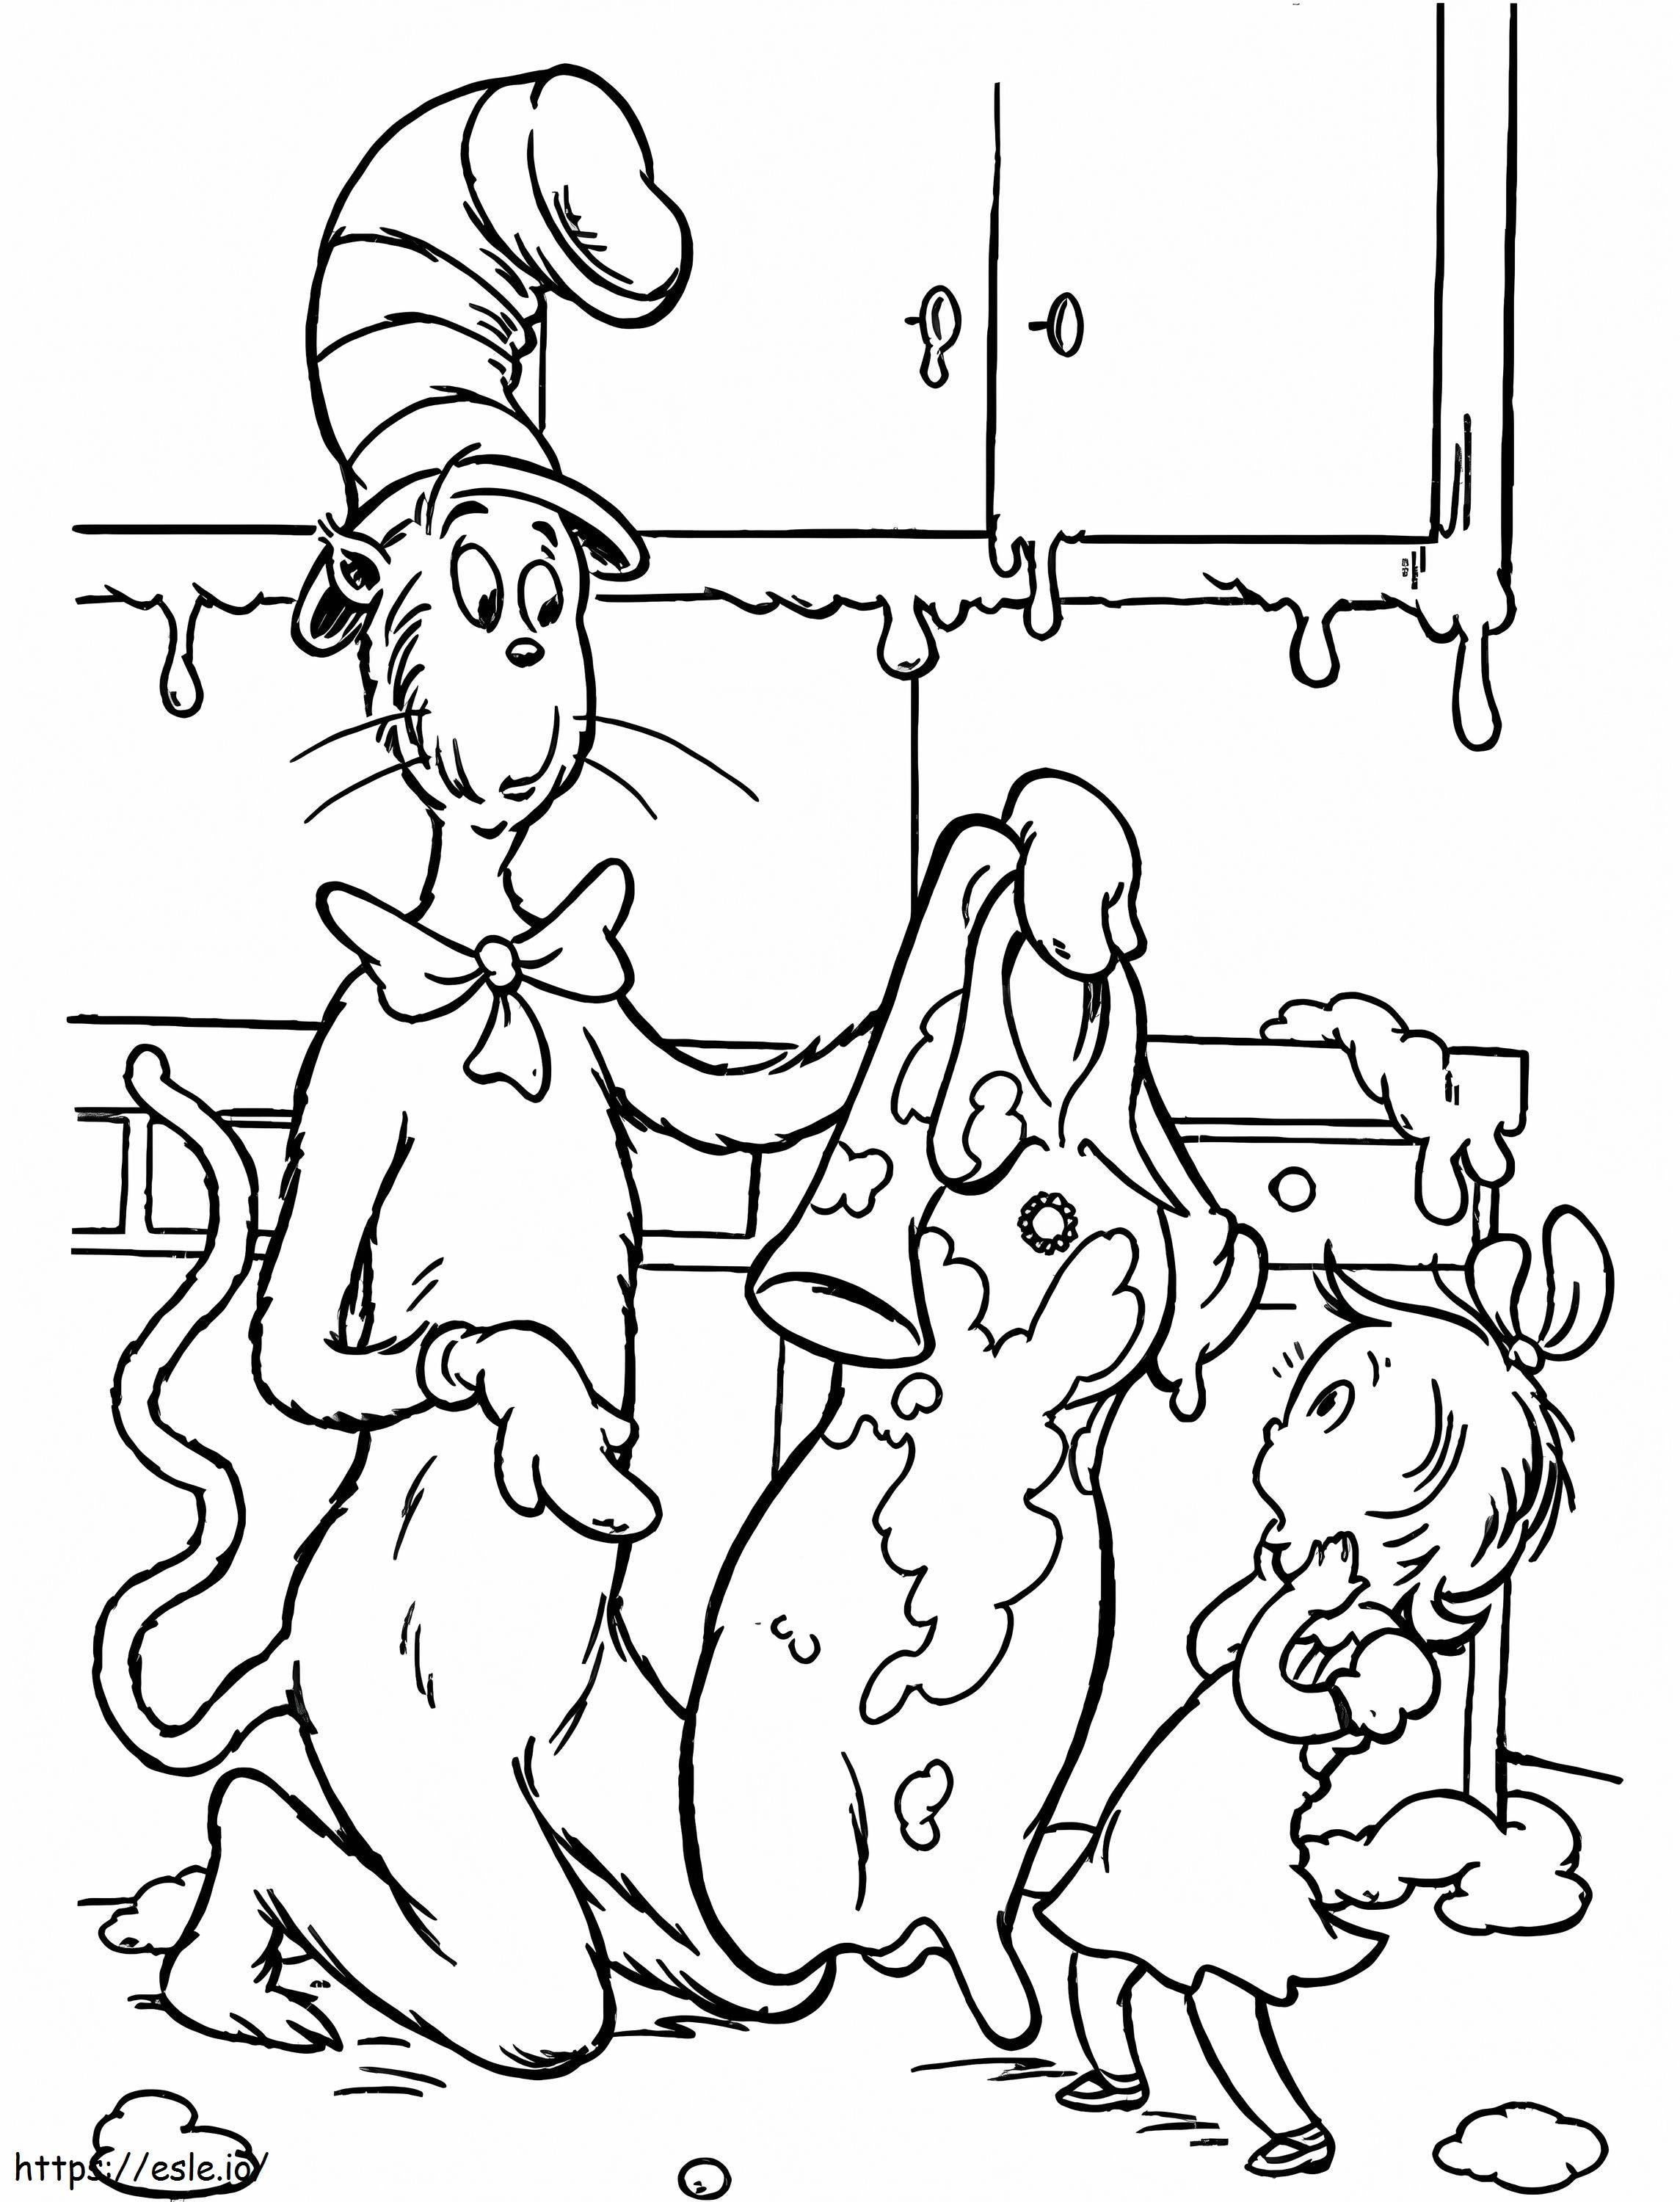 1568014163 Sally And Cat A4 coloring page